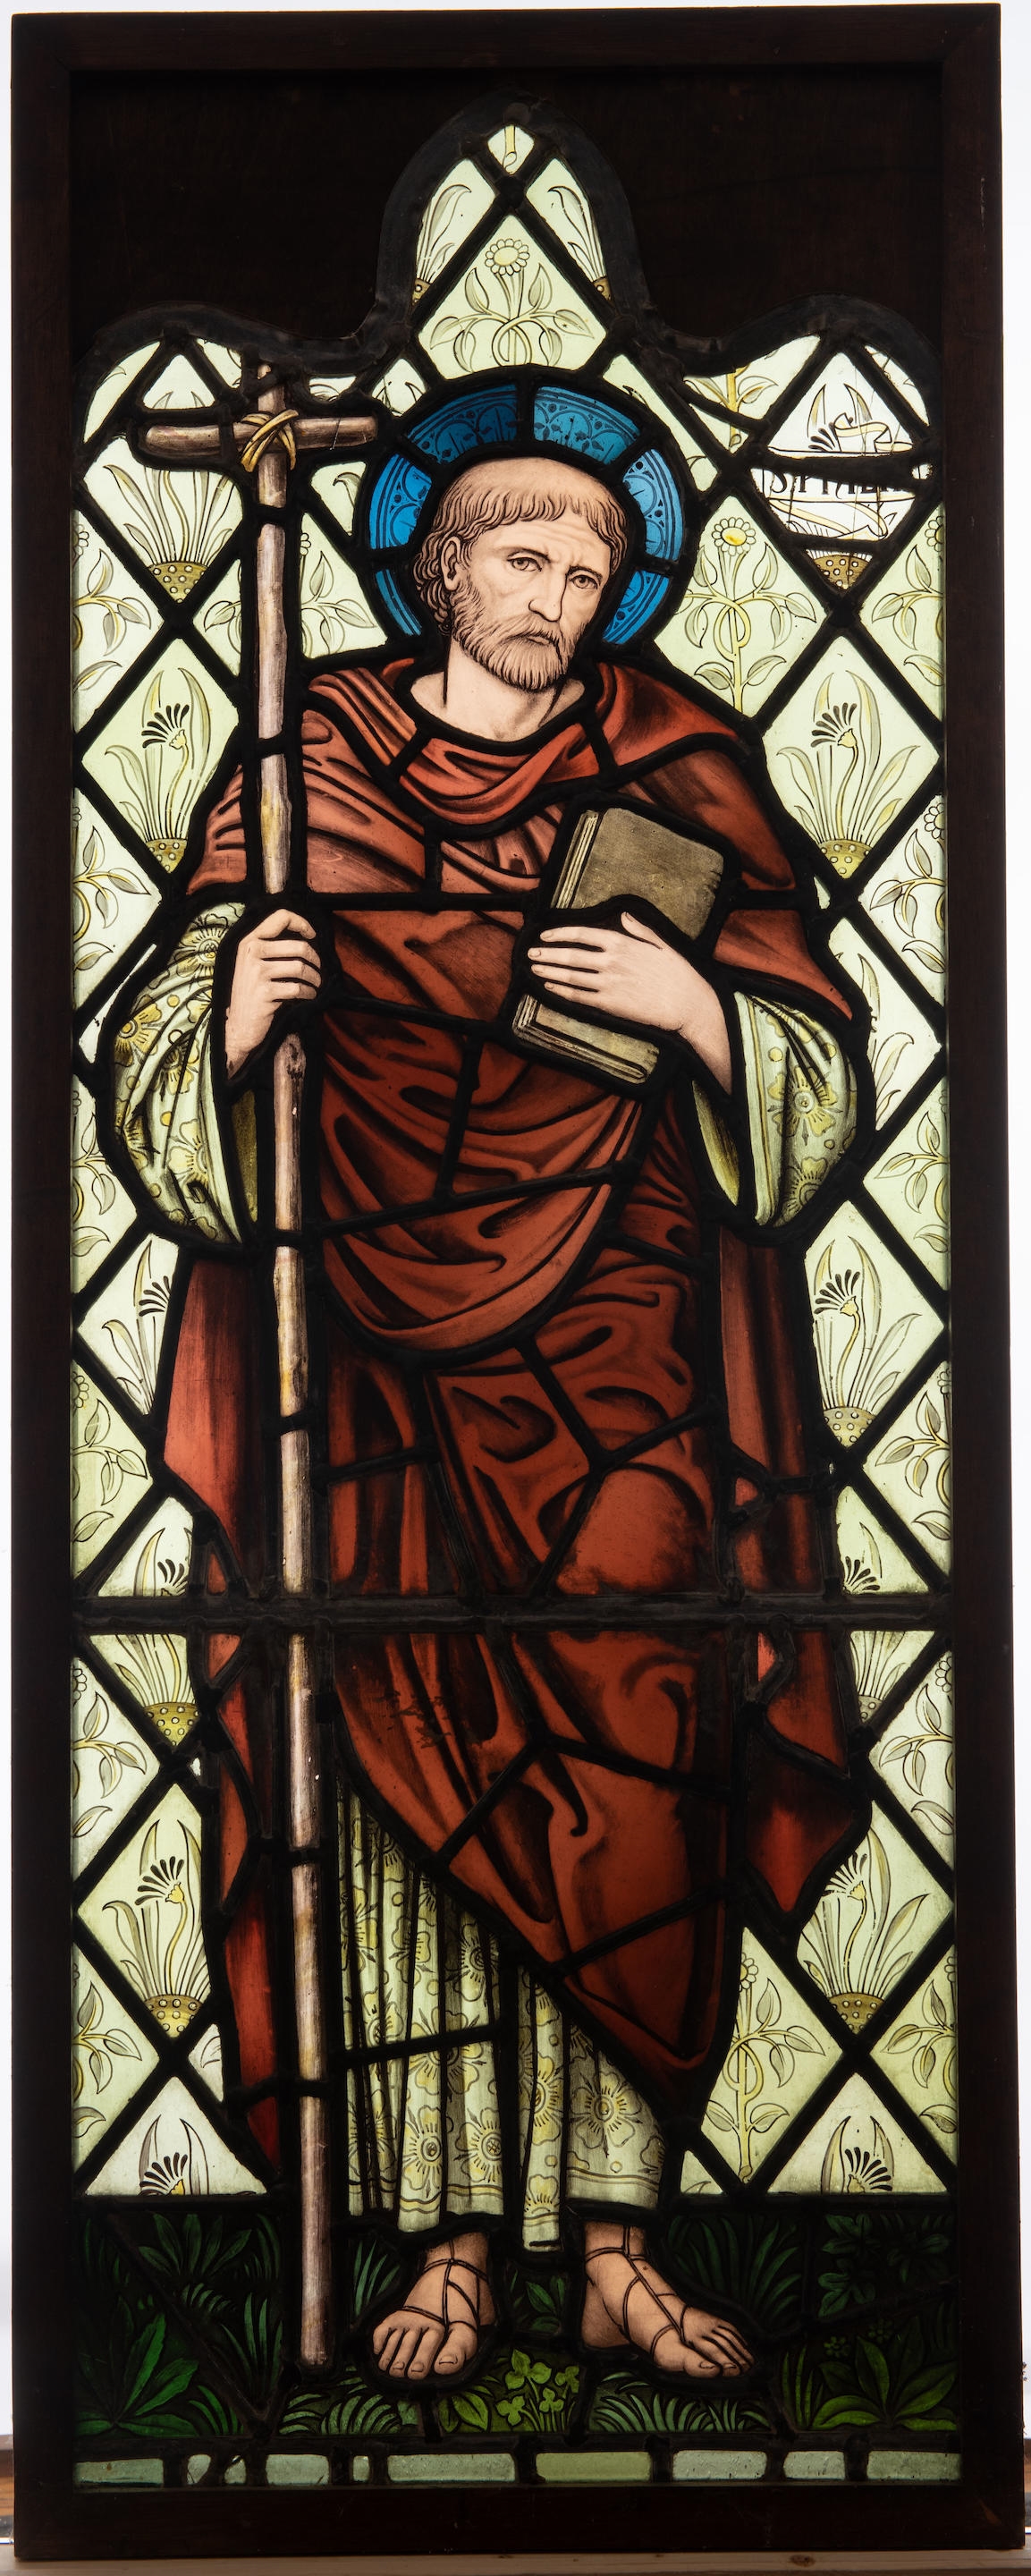 St. Peter
circa 1880
for William Morris & Co, leaded and enameled stained glass
38 3/4in x 14 5/8in (98.5cm x 37cm - Edward Burne-Jones